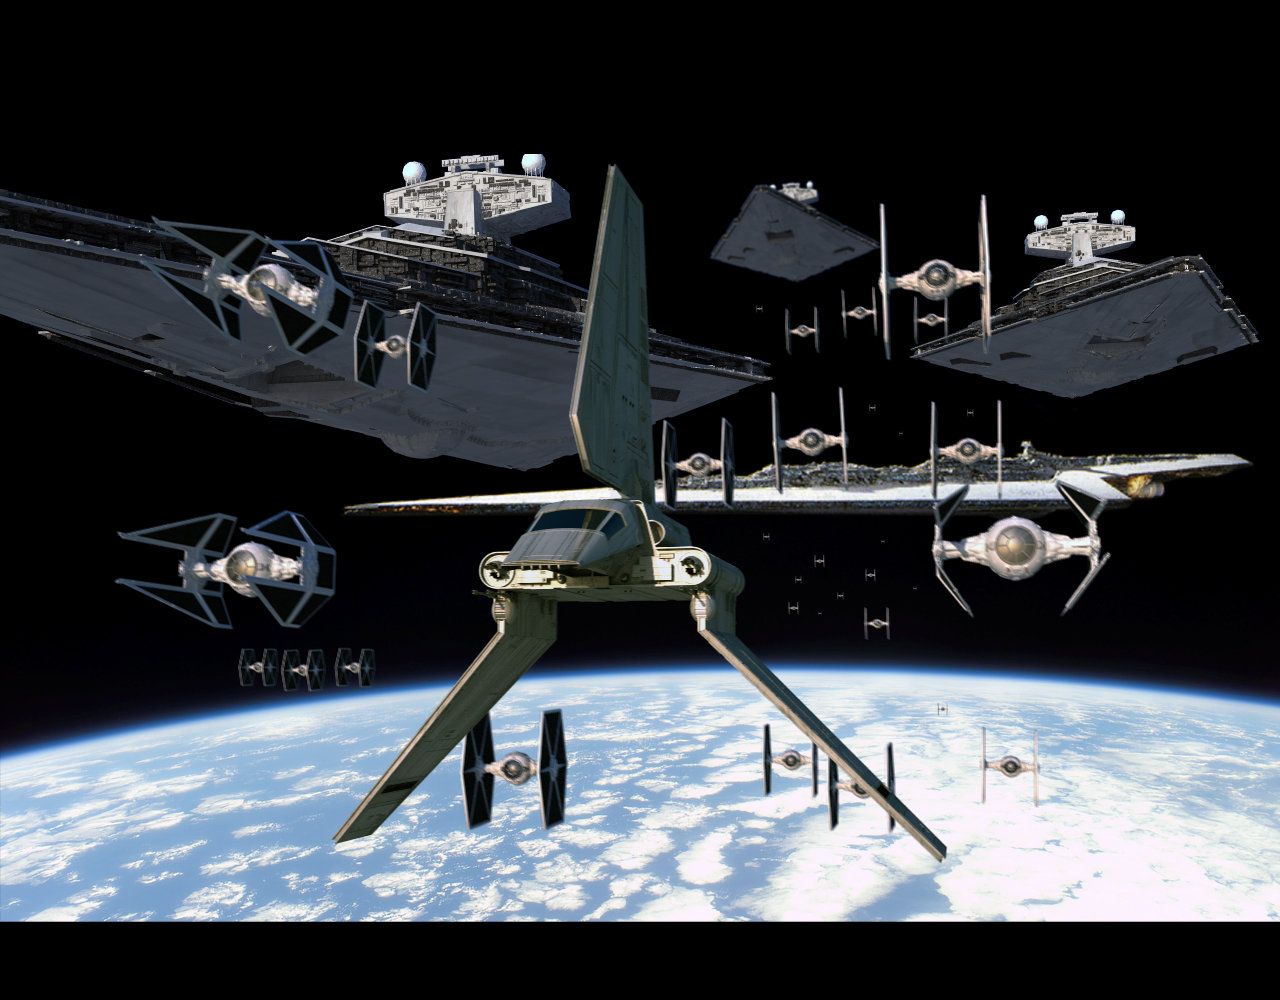 Imperial navy of the first Galactic Empire. Star wars ships, Empire strike, Star wars wallpaper